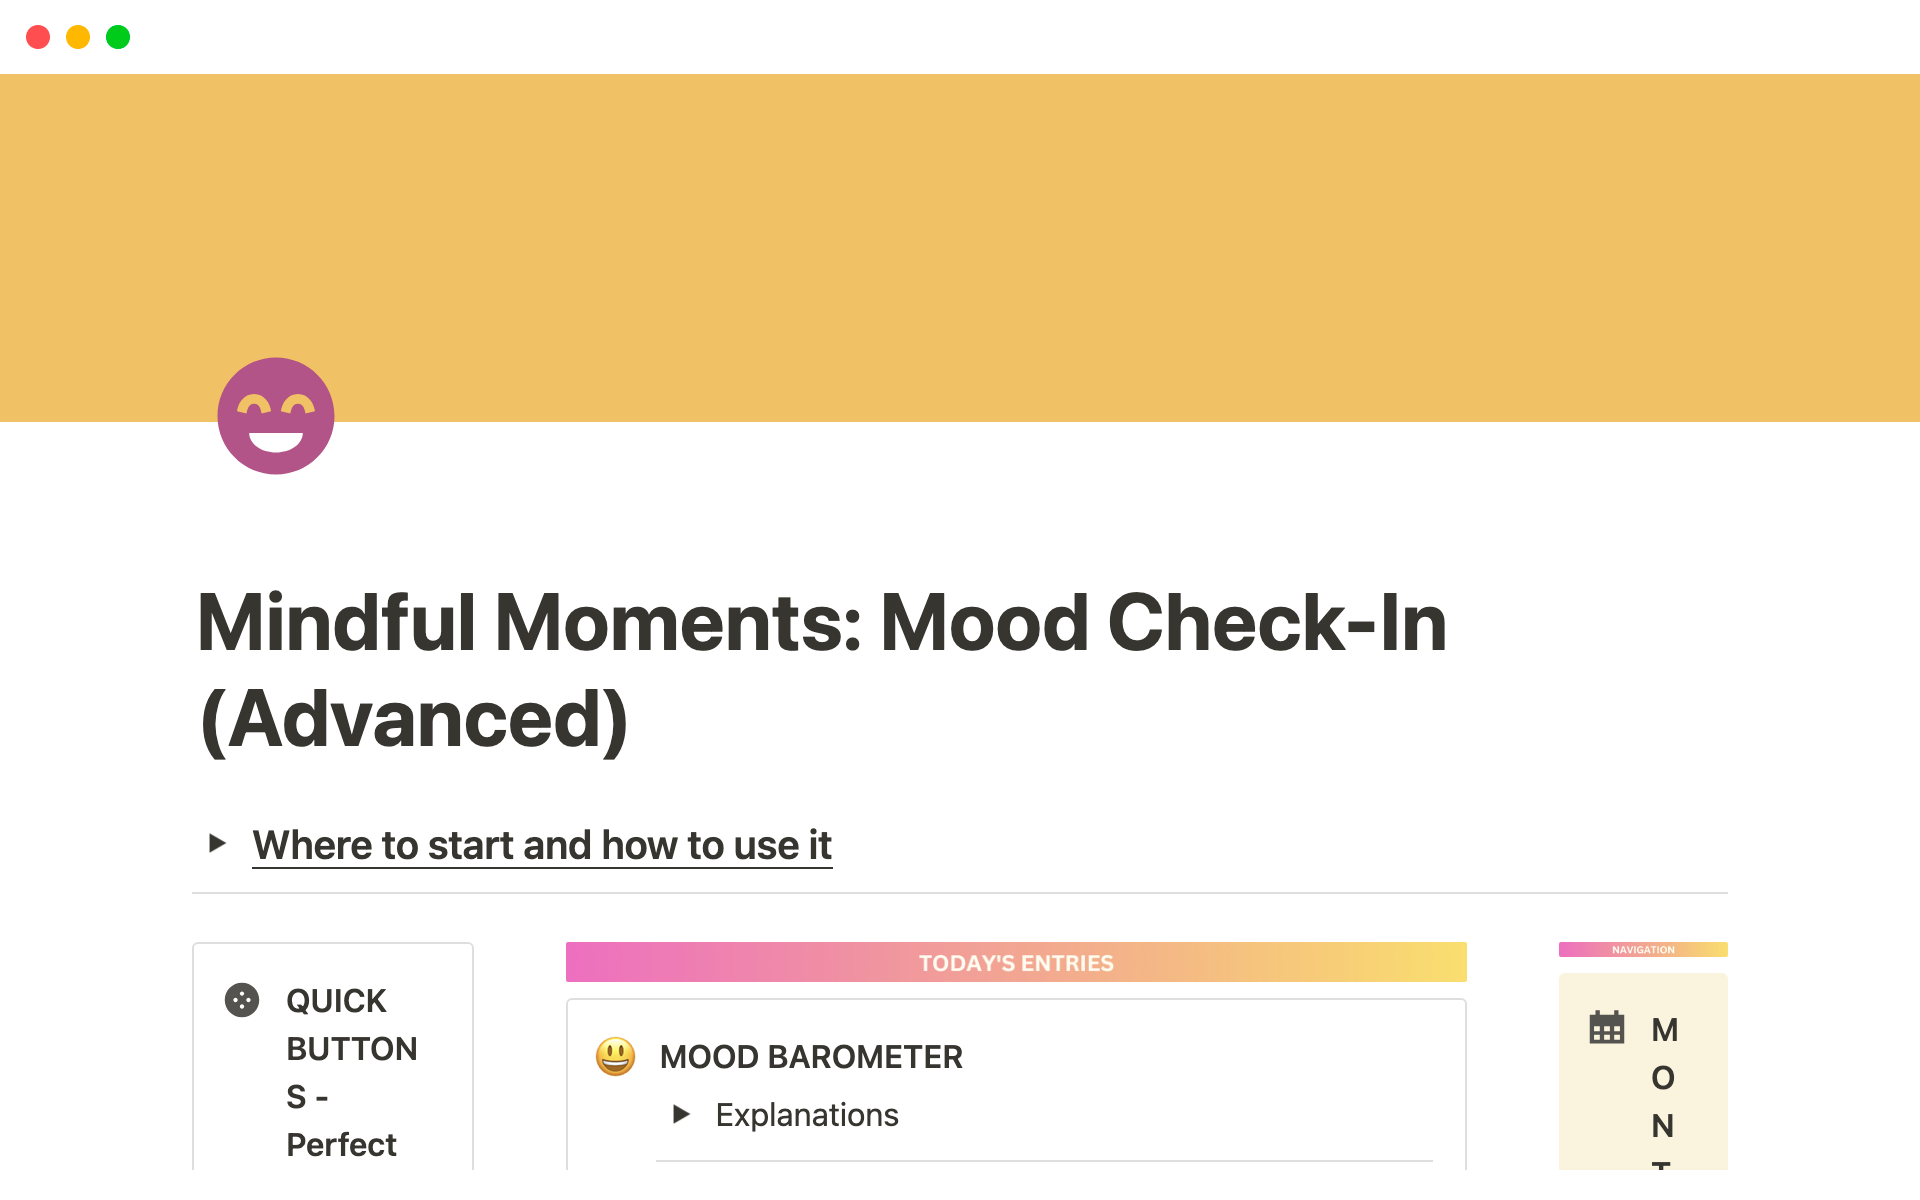 The "Mindful Moments: Mood Check-In (Advanced)" Notion Template helps you track and evaluate your daily moods with the wellbeing score, establish and monitor healthy routines, prioritize restful sleep, weekly and monthly overviews of your progress.